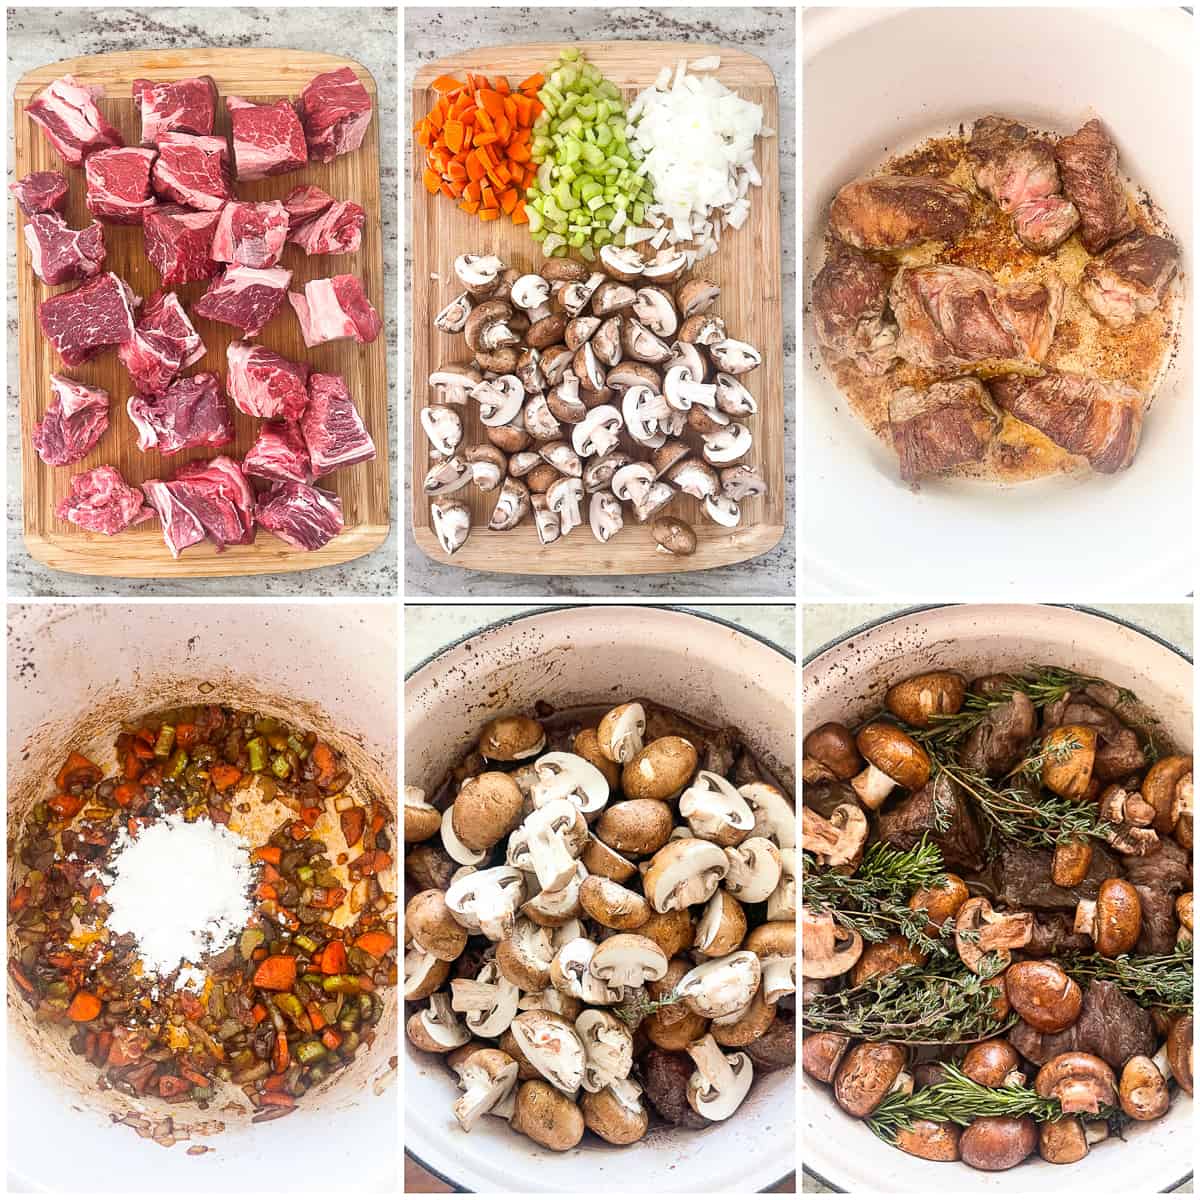 6 quadrants showing the step by step instructions on how to make the braised beef with mushrooms and red wine recipe